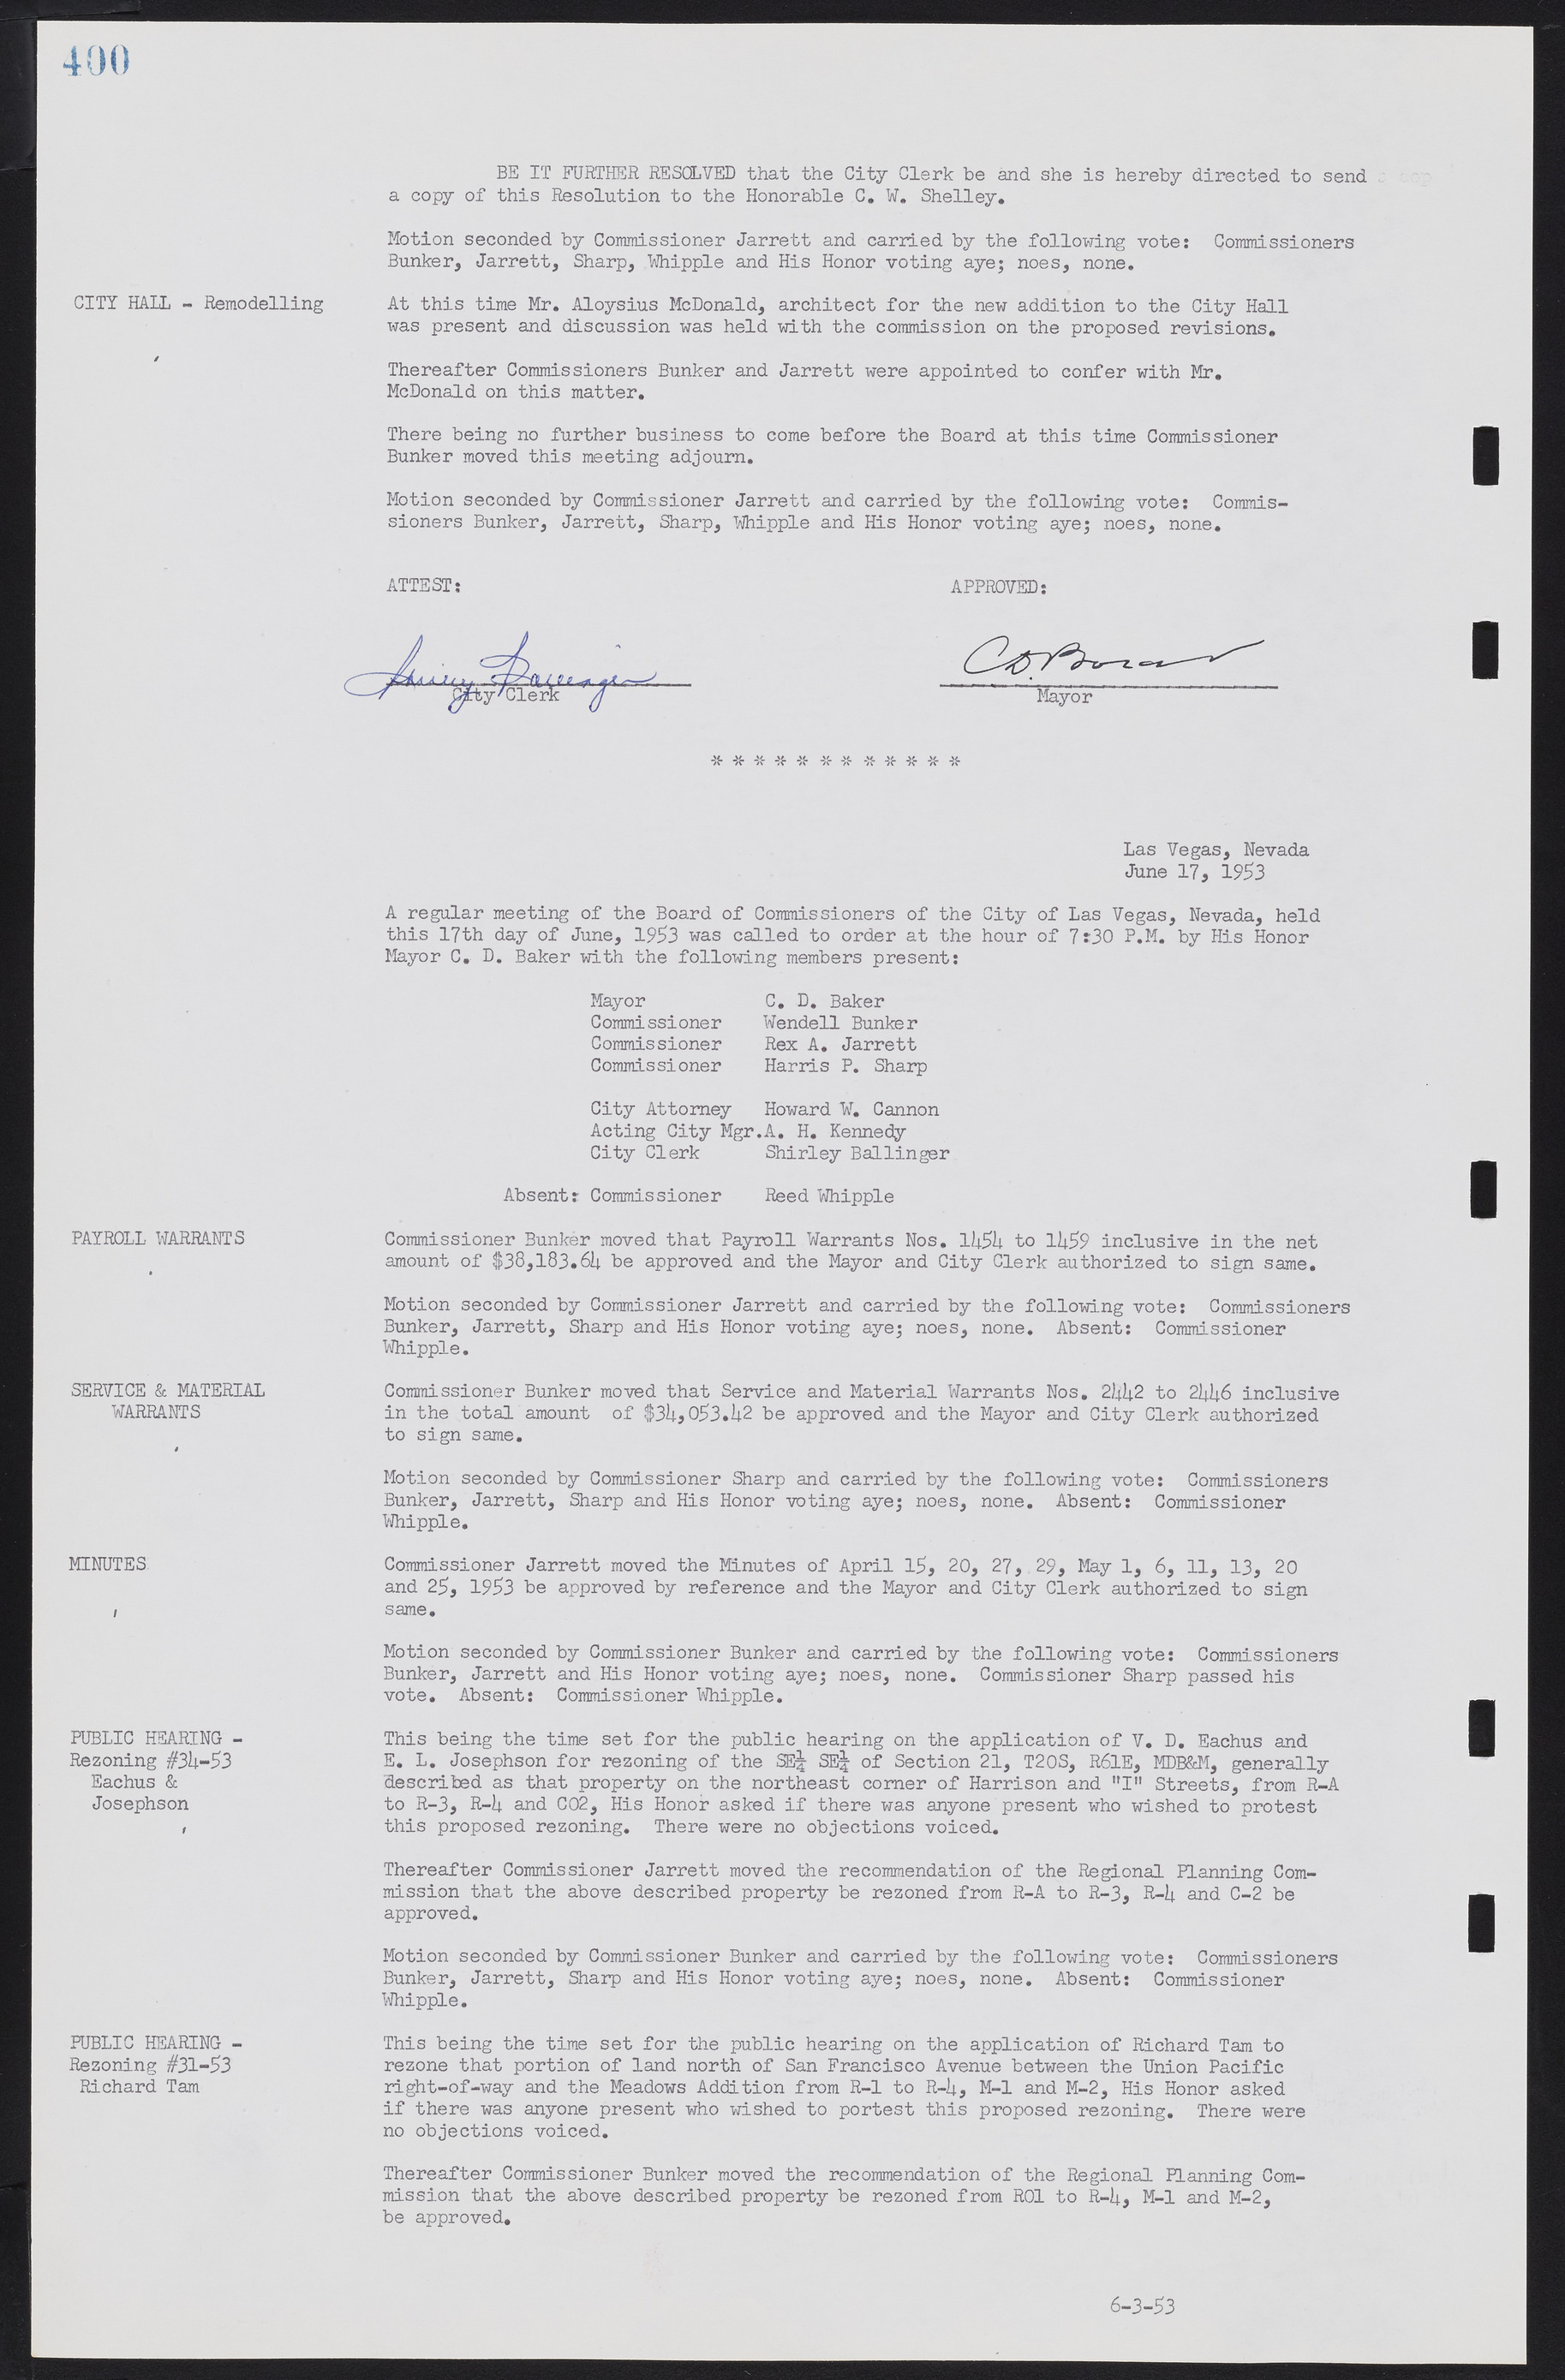 Las Vegas City Commission Minutes, May 26, 1952 to February 17, 1954, lvc000008-428